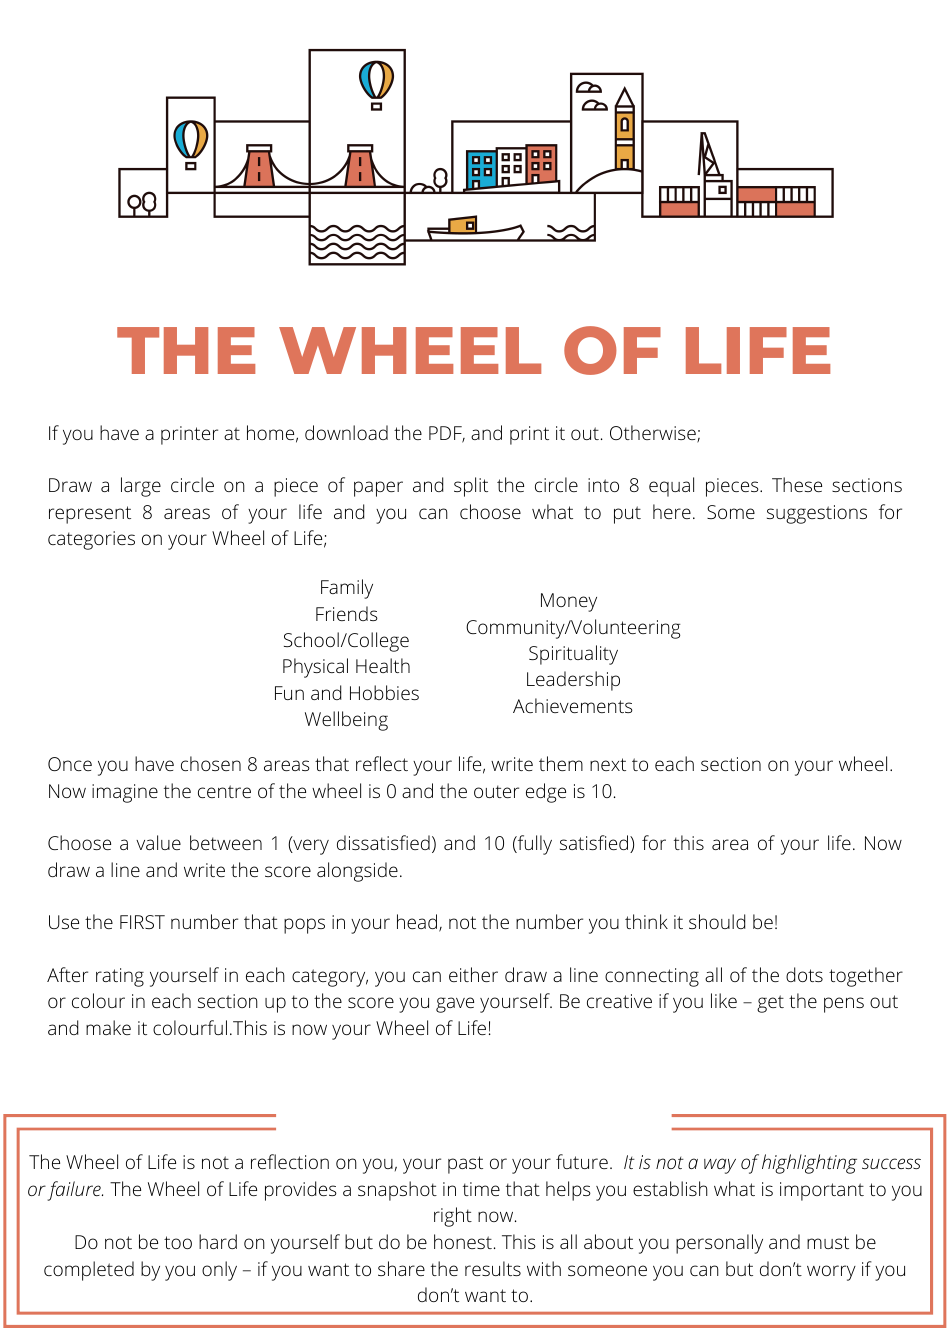 Wheel of Life Template - Future Quest, Page 1